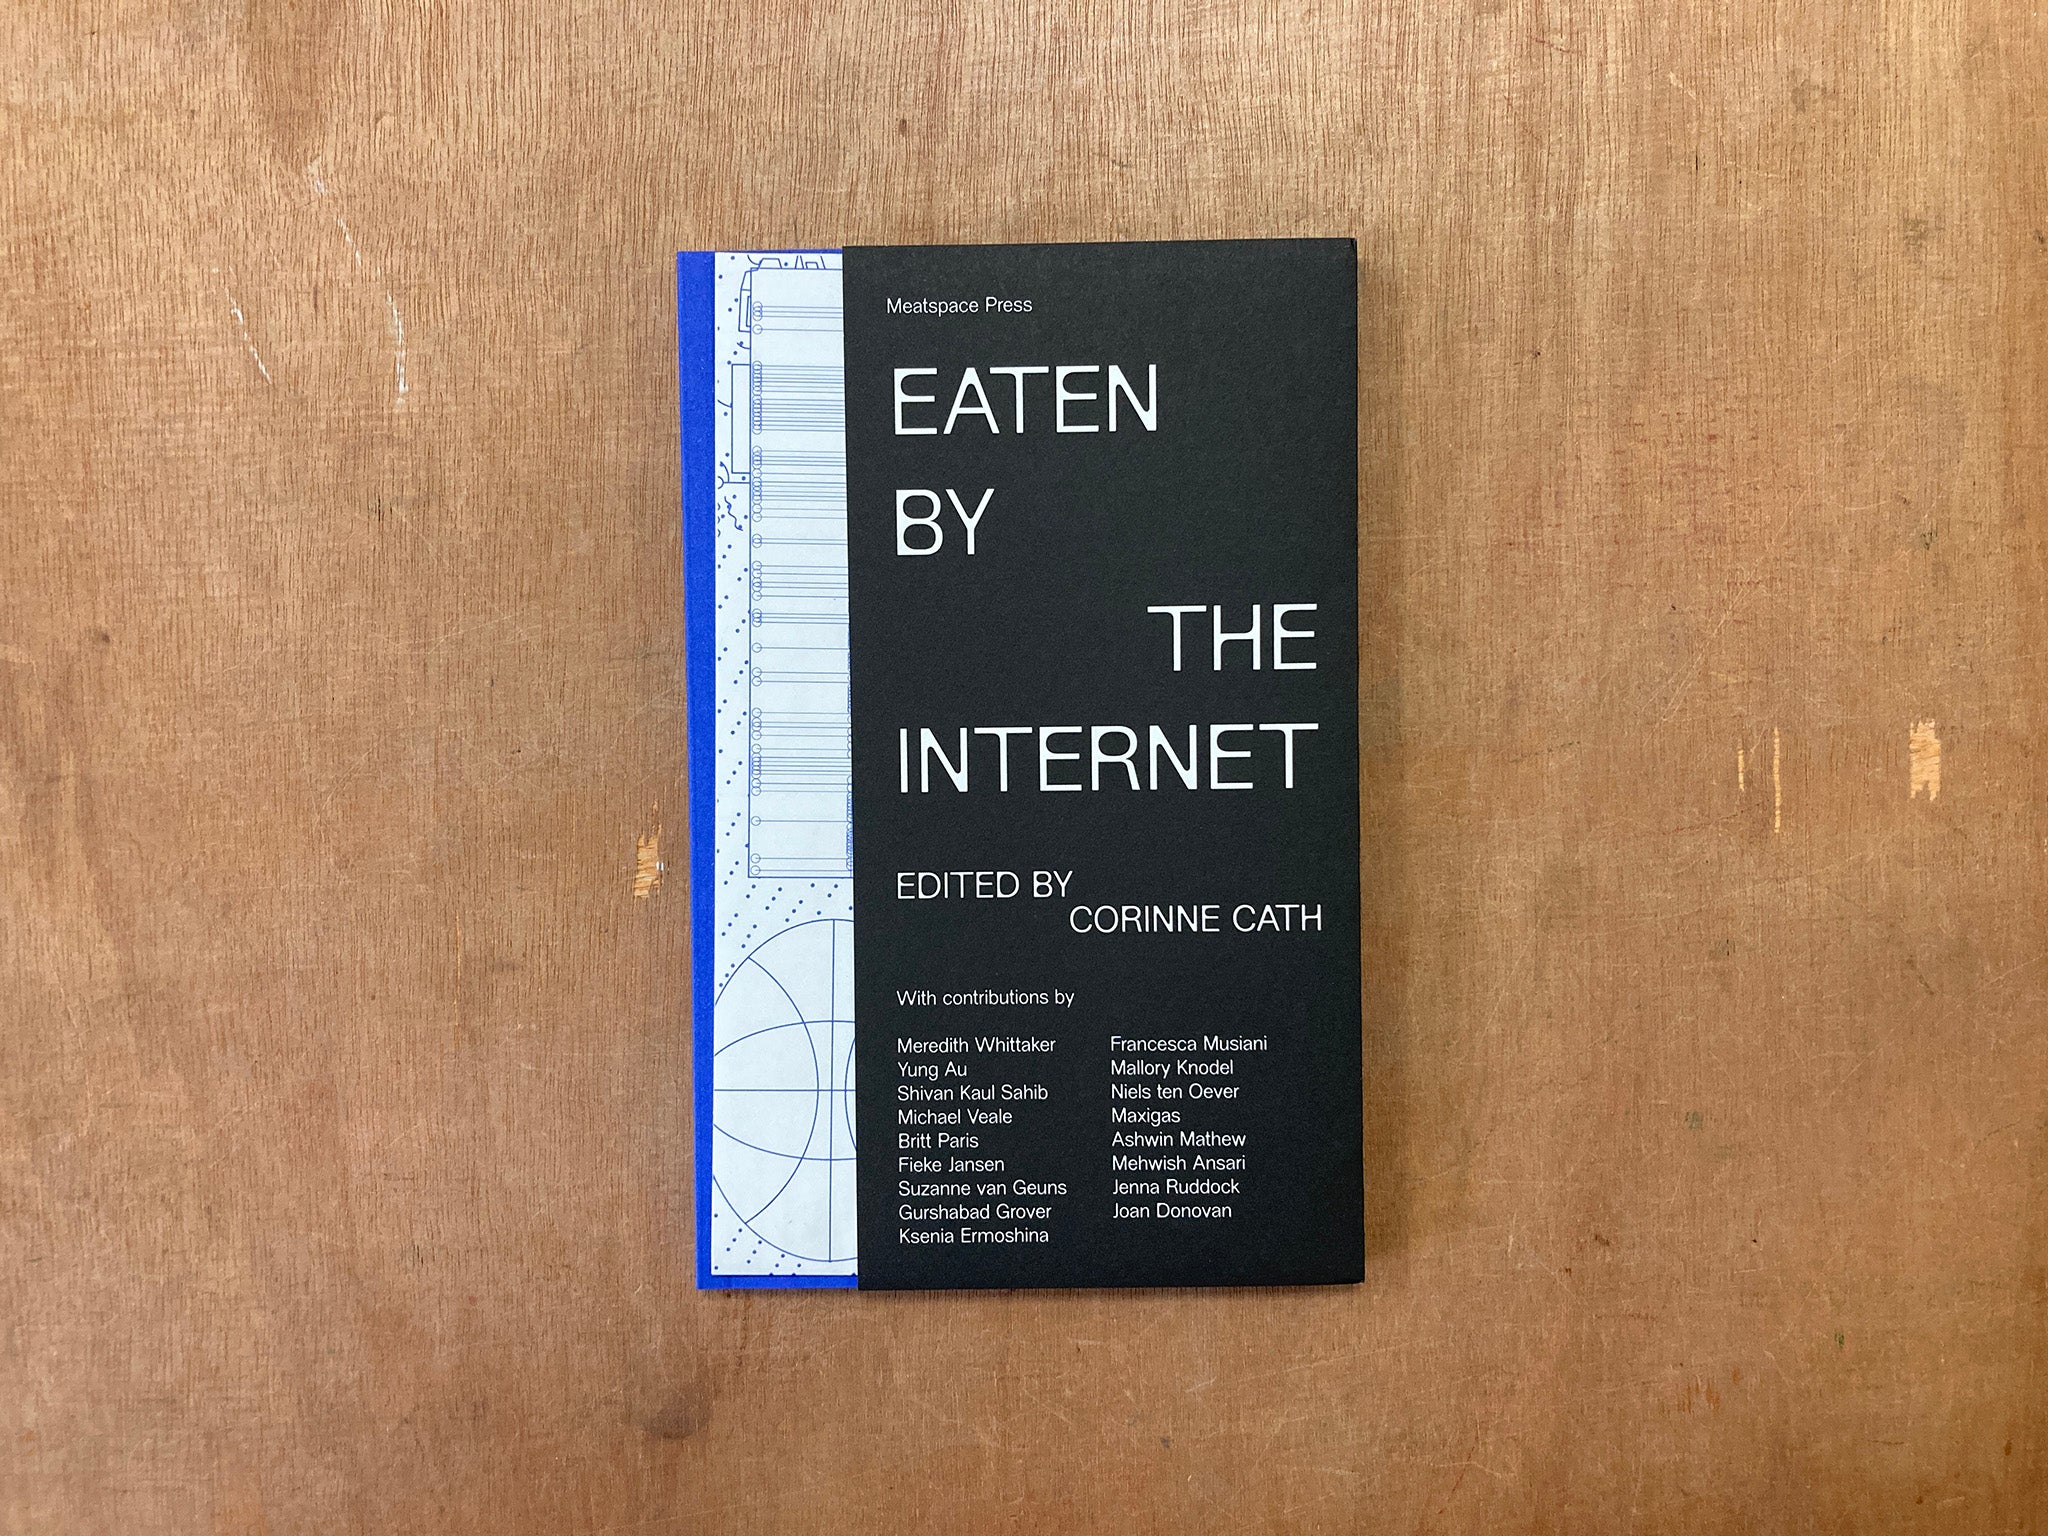 EATEN BY THE INTERNET edited by Corinne Cath